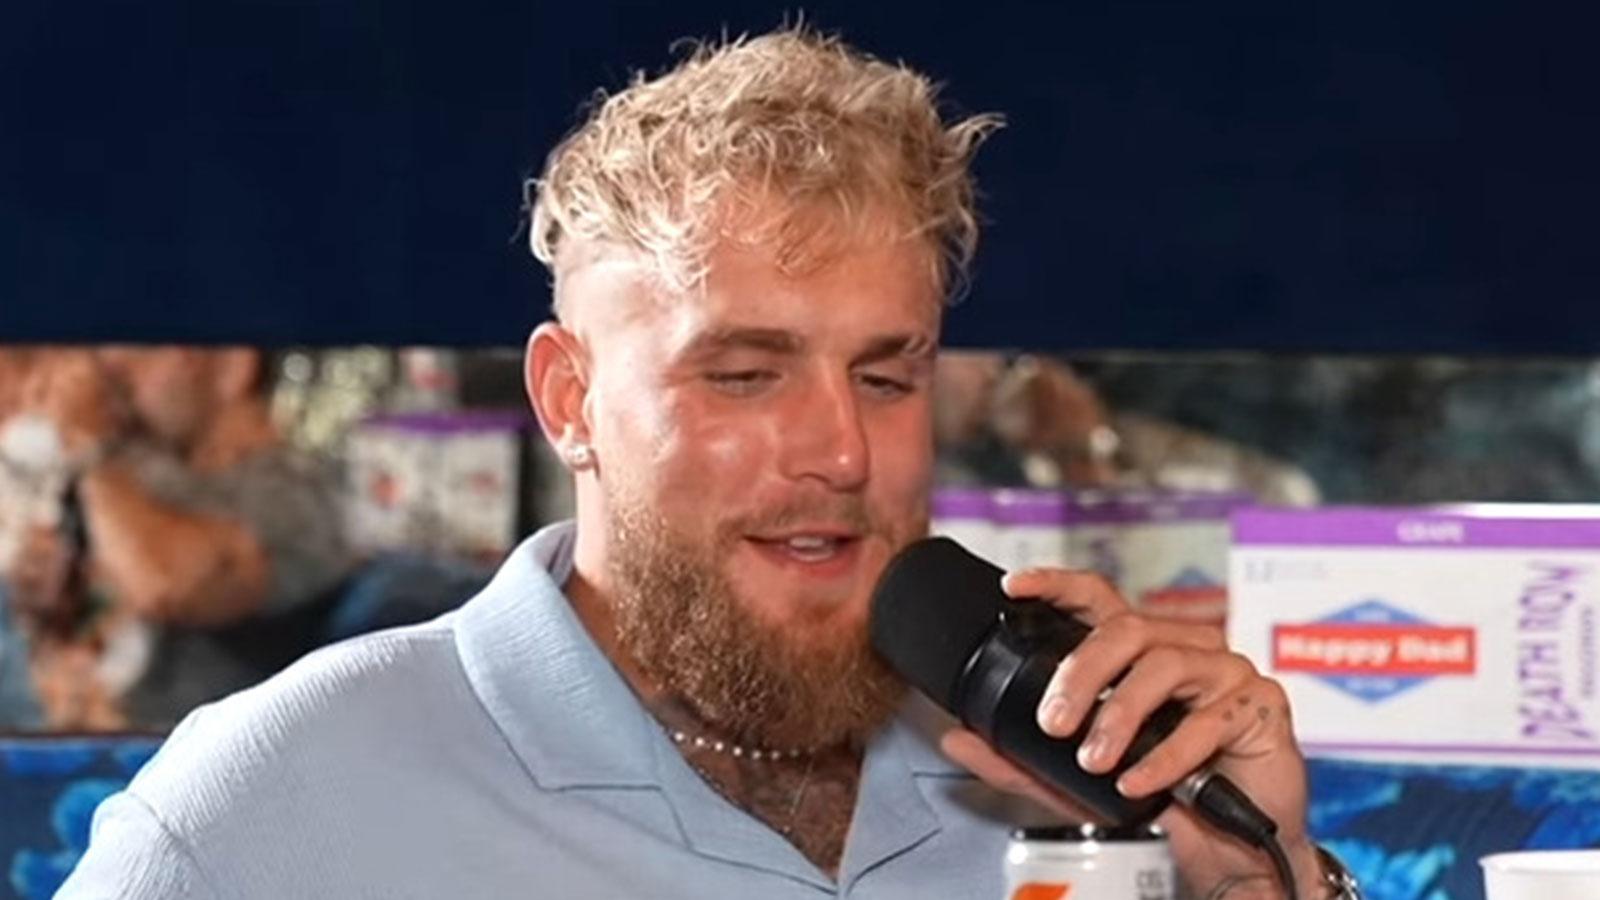 Jake Paul sat holding a microphone for FULL SEND podcast